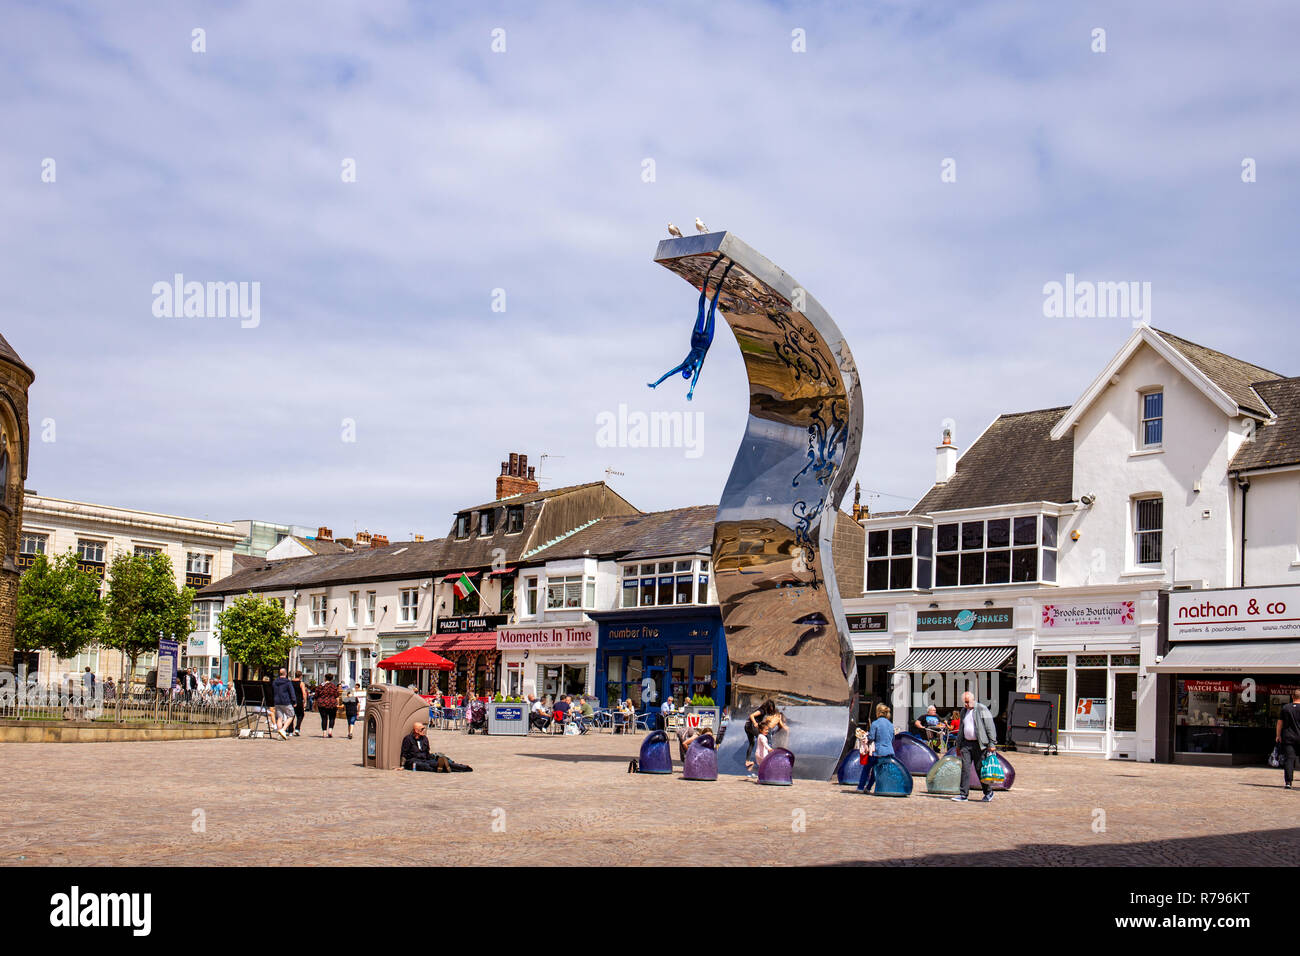 St John's Square with The Wave sculpture by Lucy Glendinning in Blackpool Lancashire UK Stock Photo